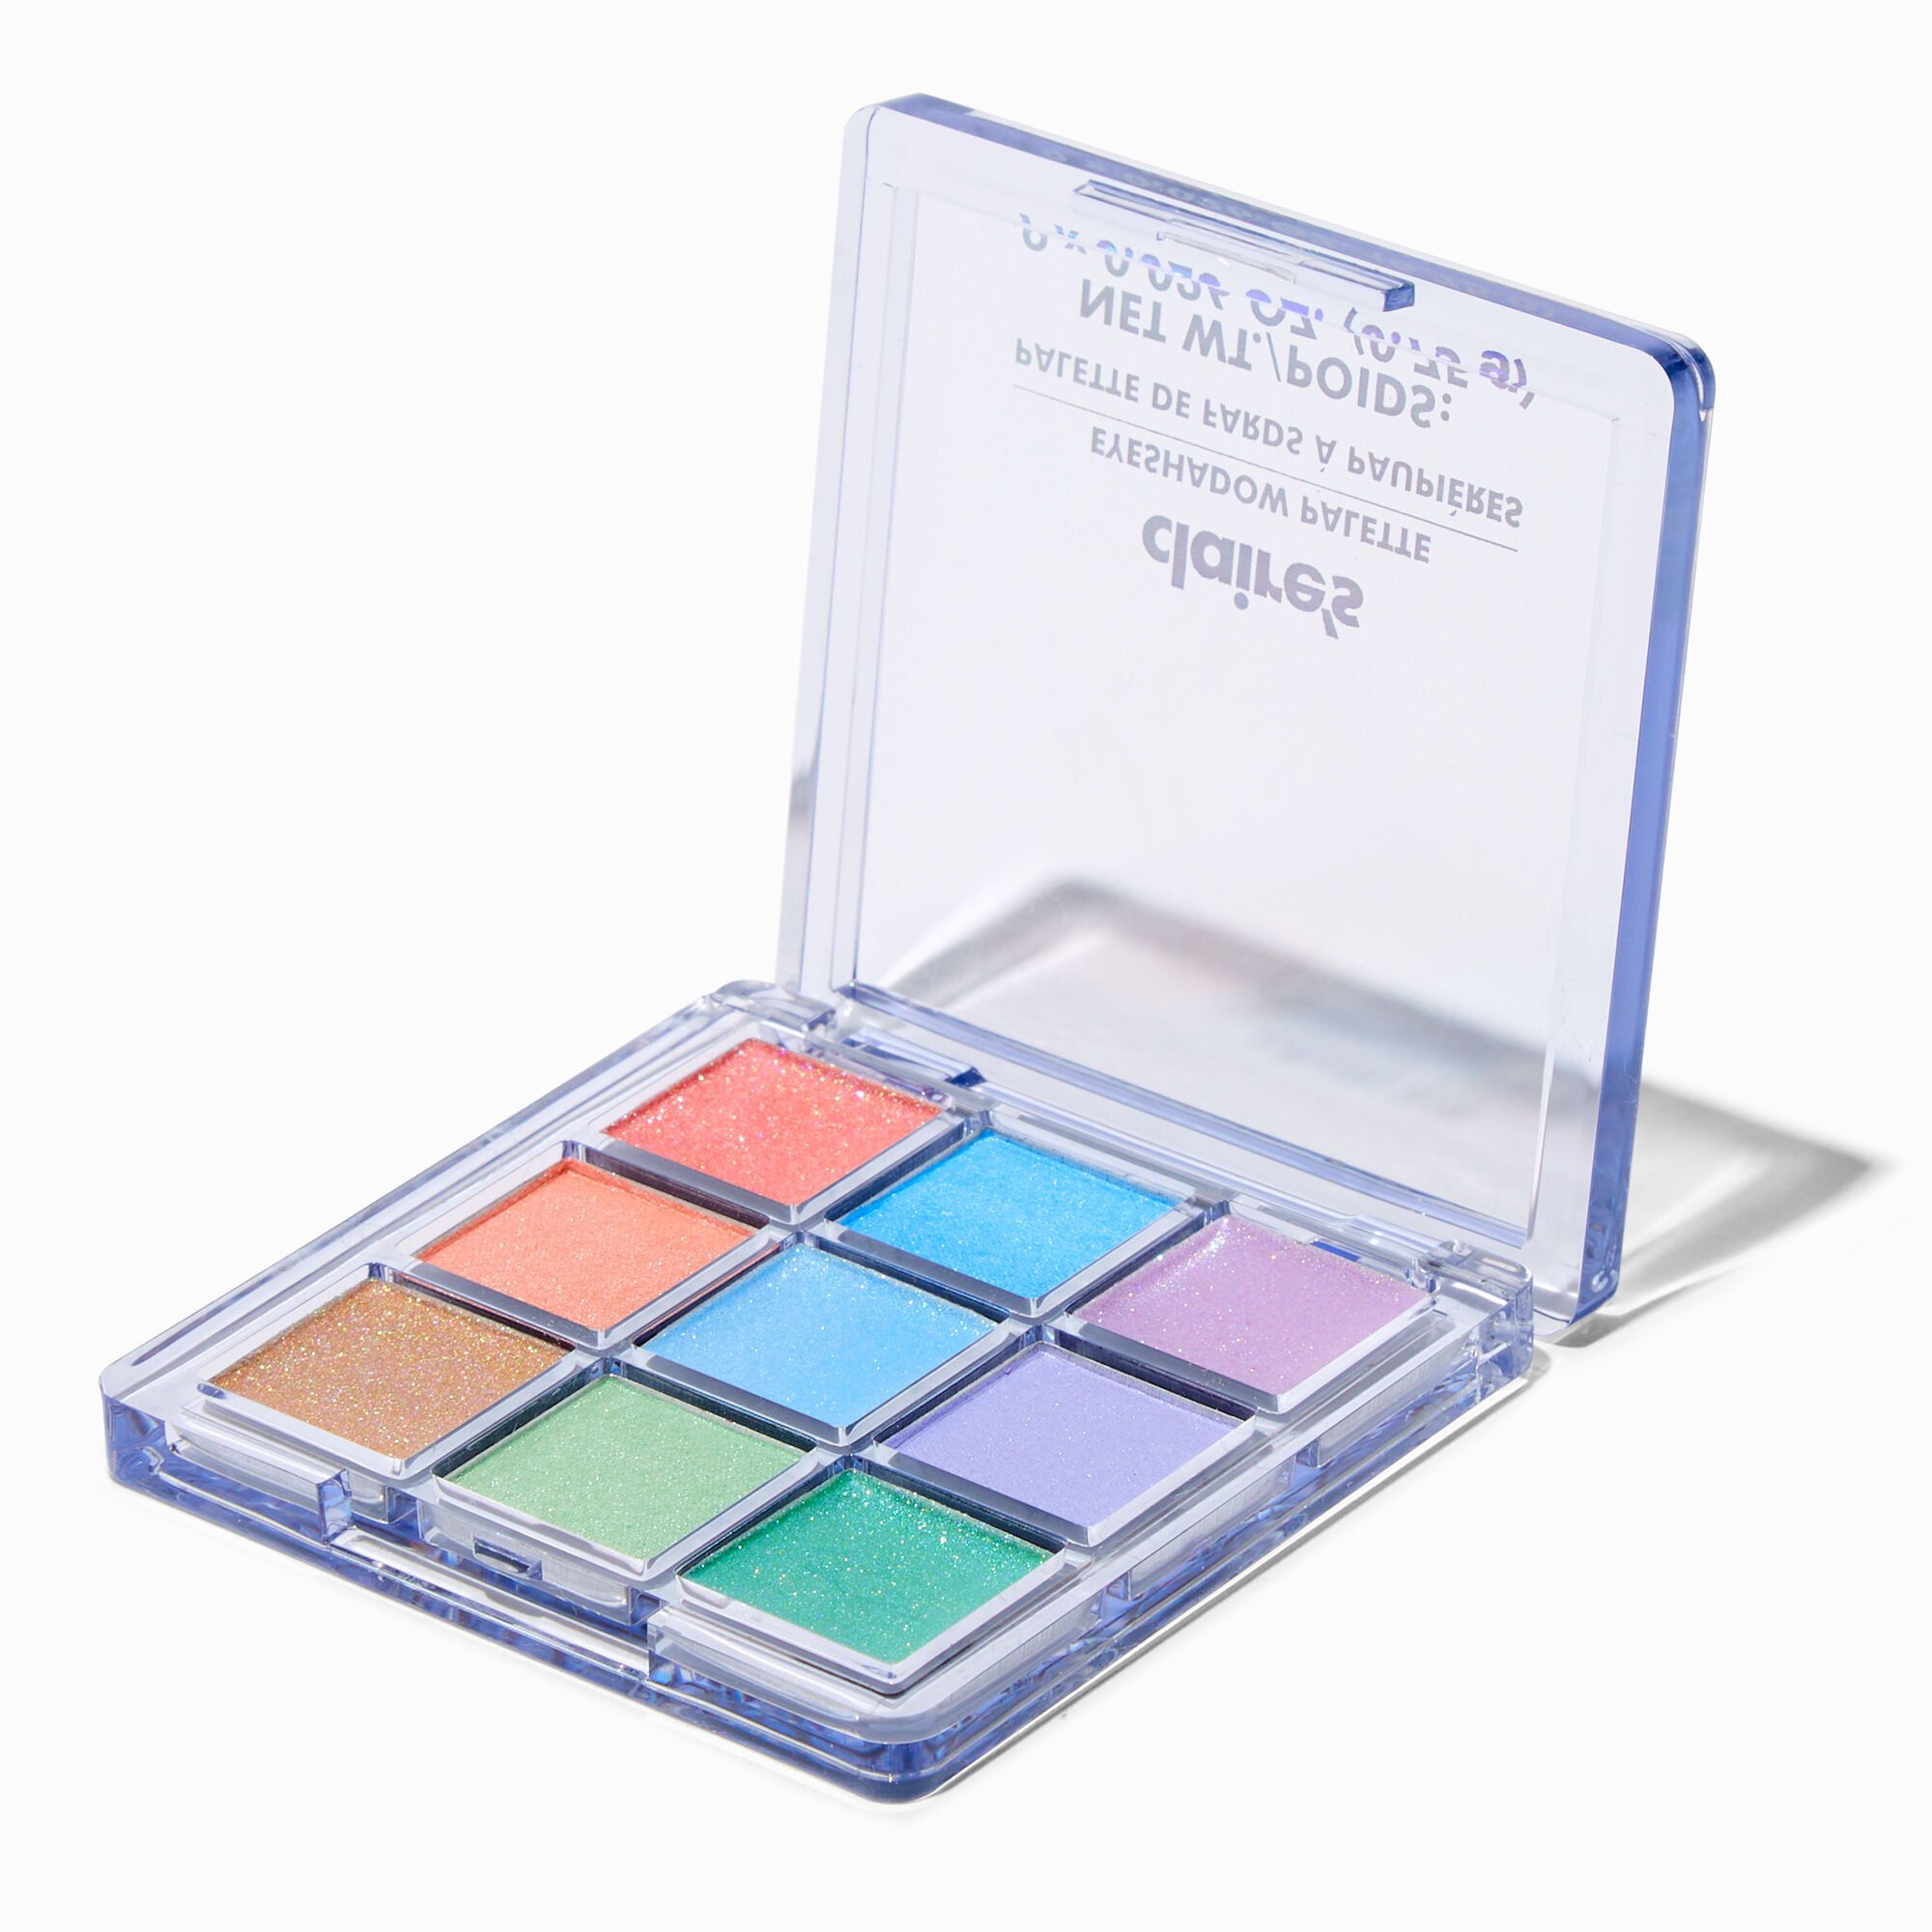 View Claires Pastel Shimmer Mini Eyeshadow Palette Rainbow information